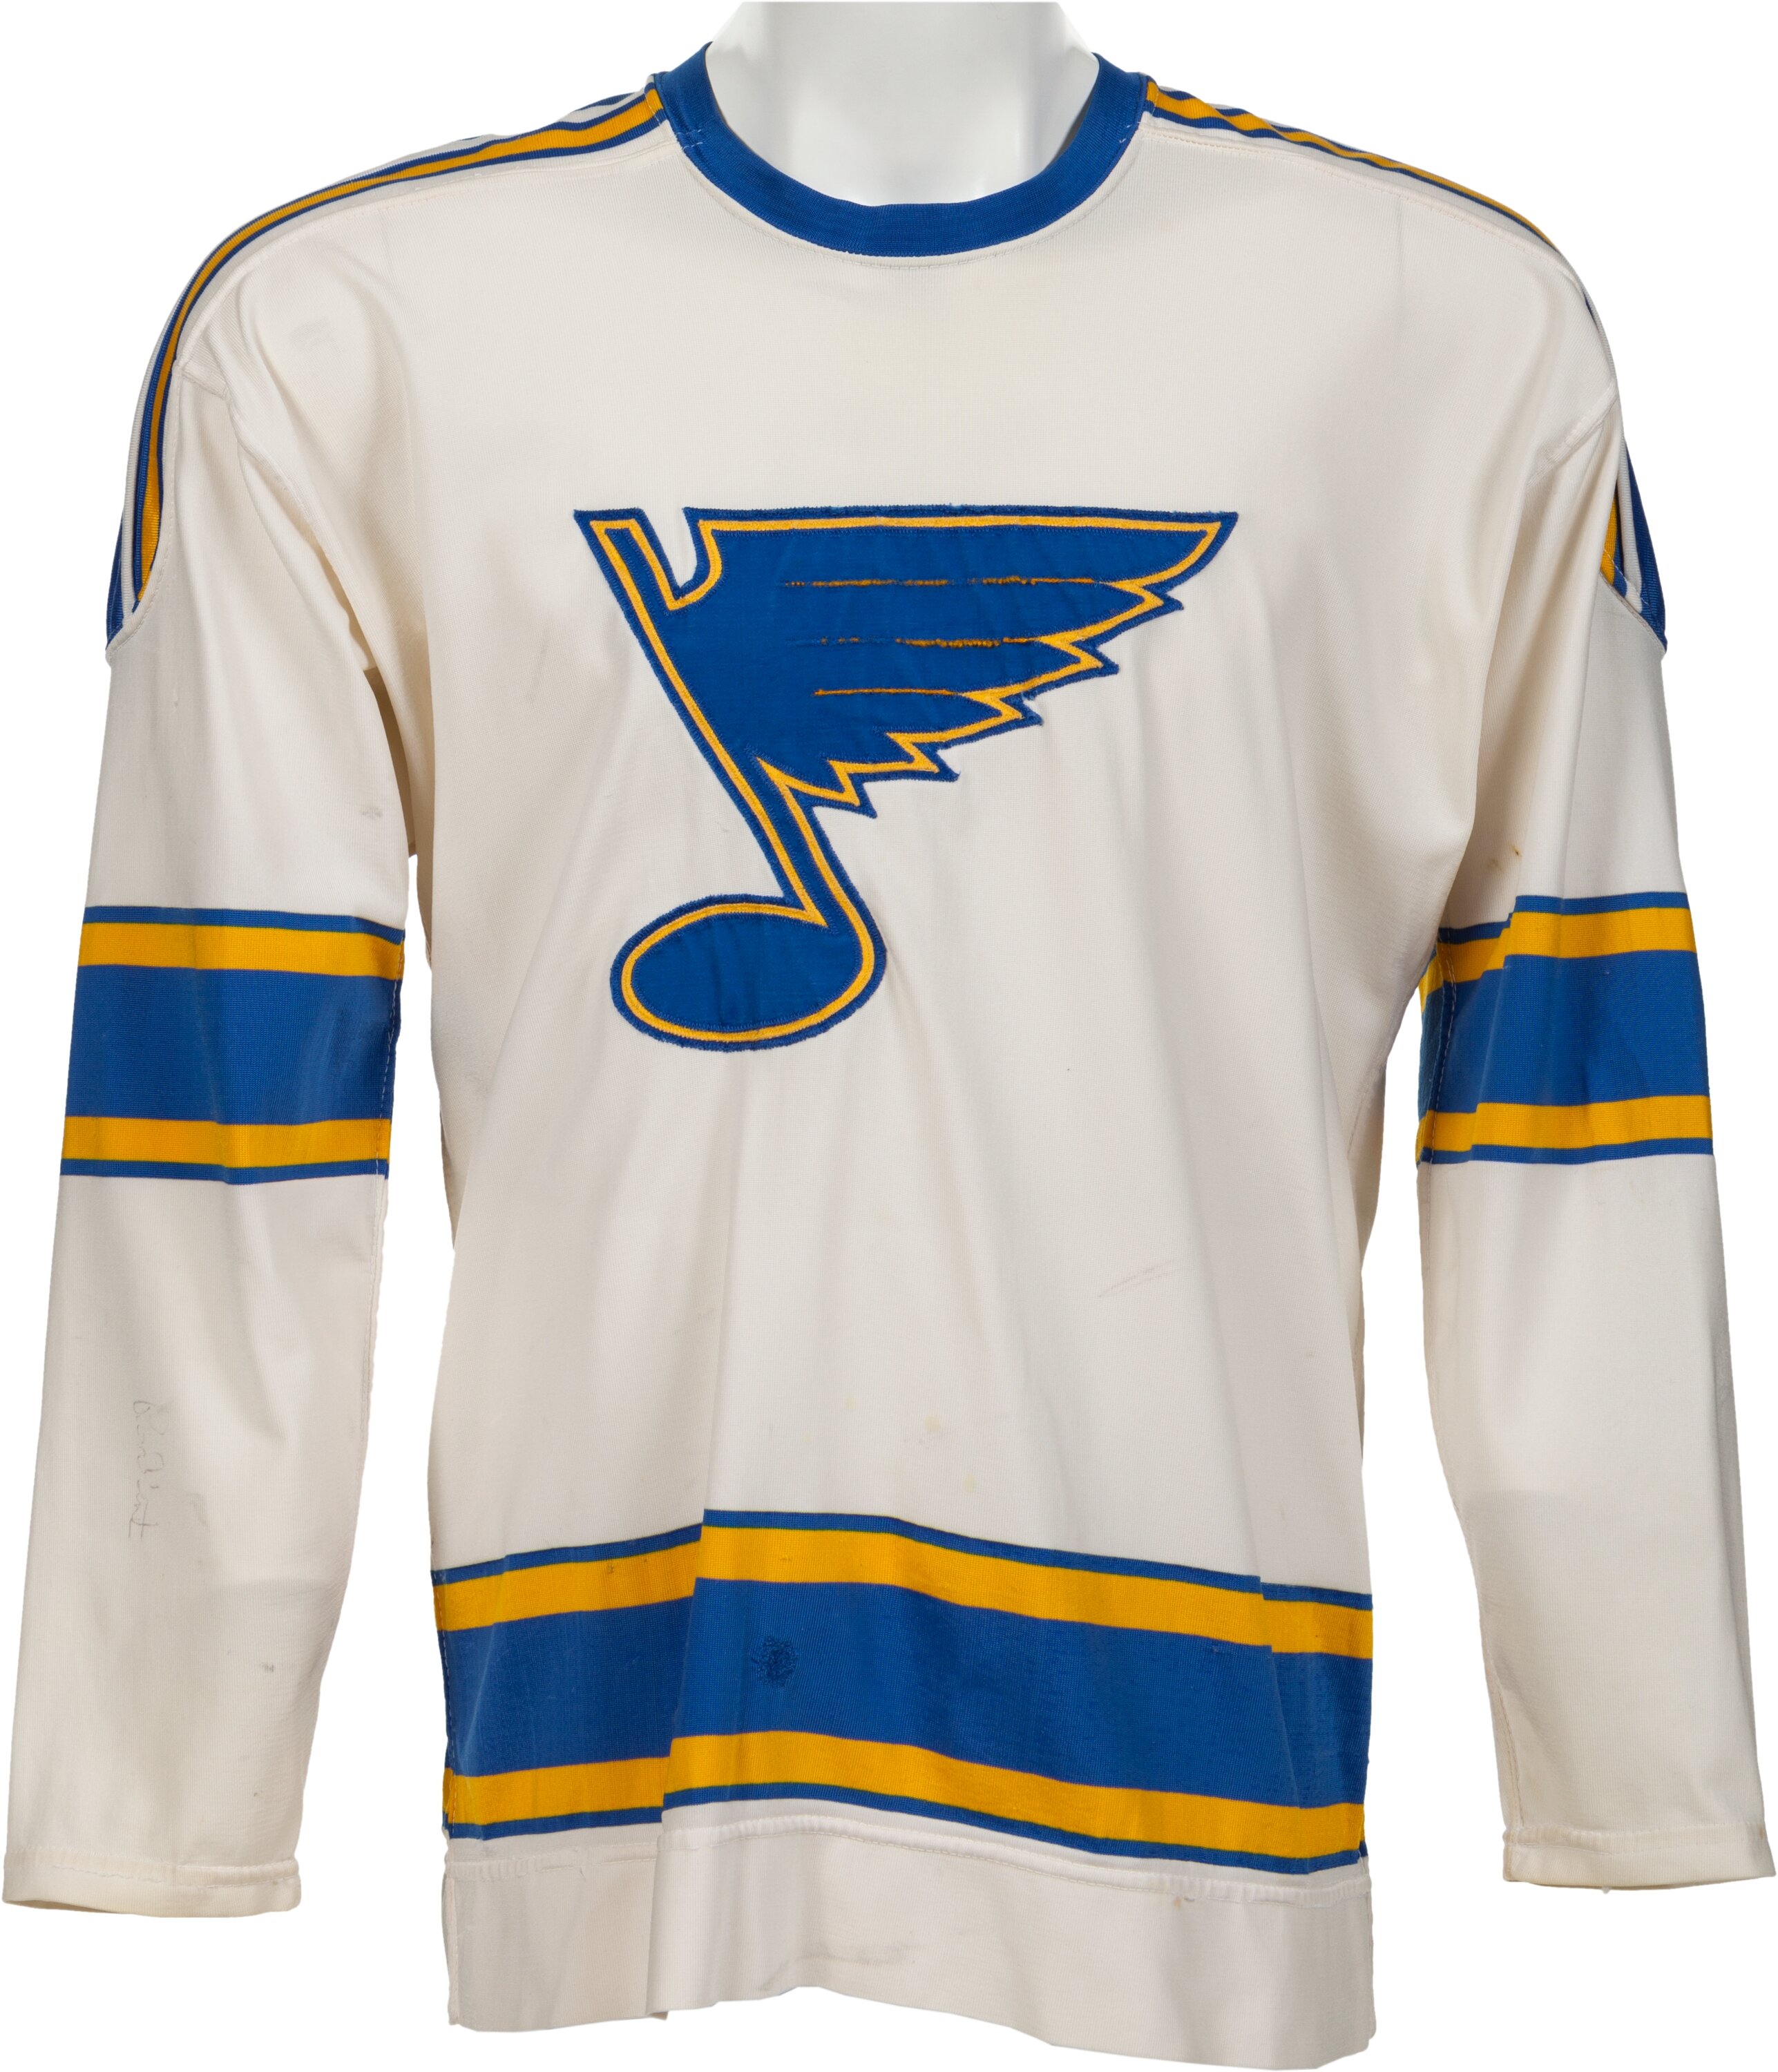 The First Blues Jersey Is Found - St. Louis Game Time